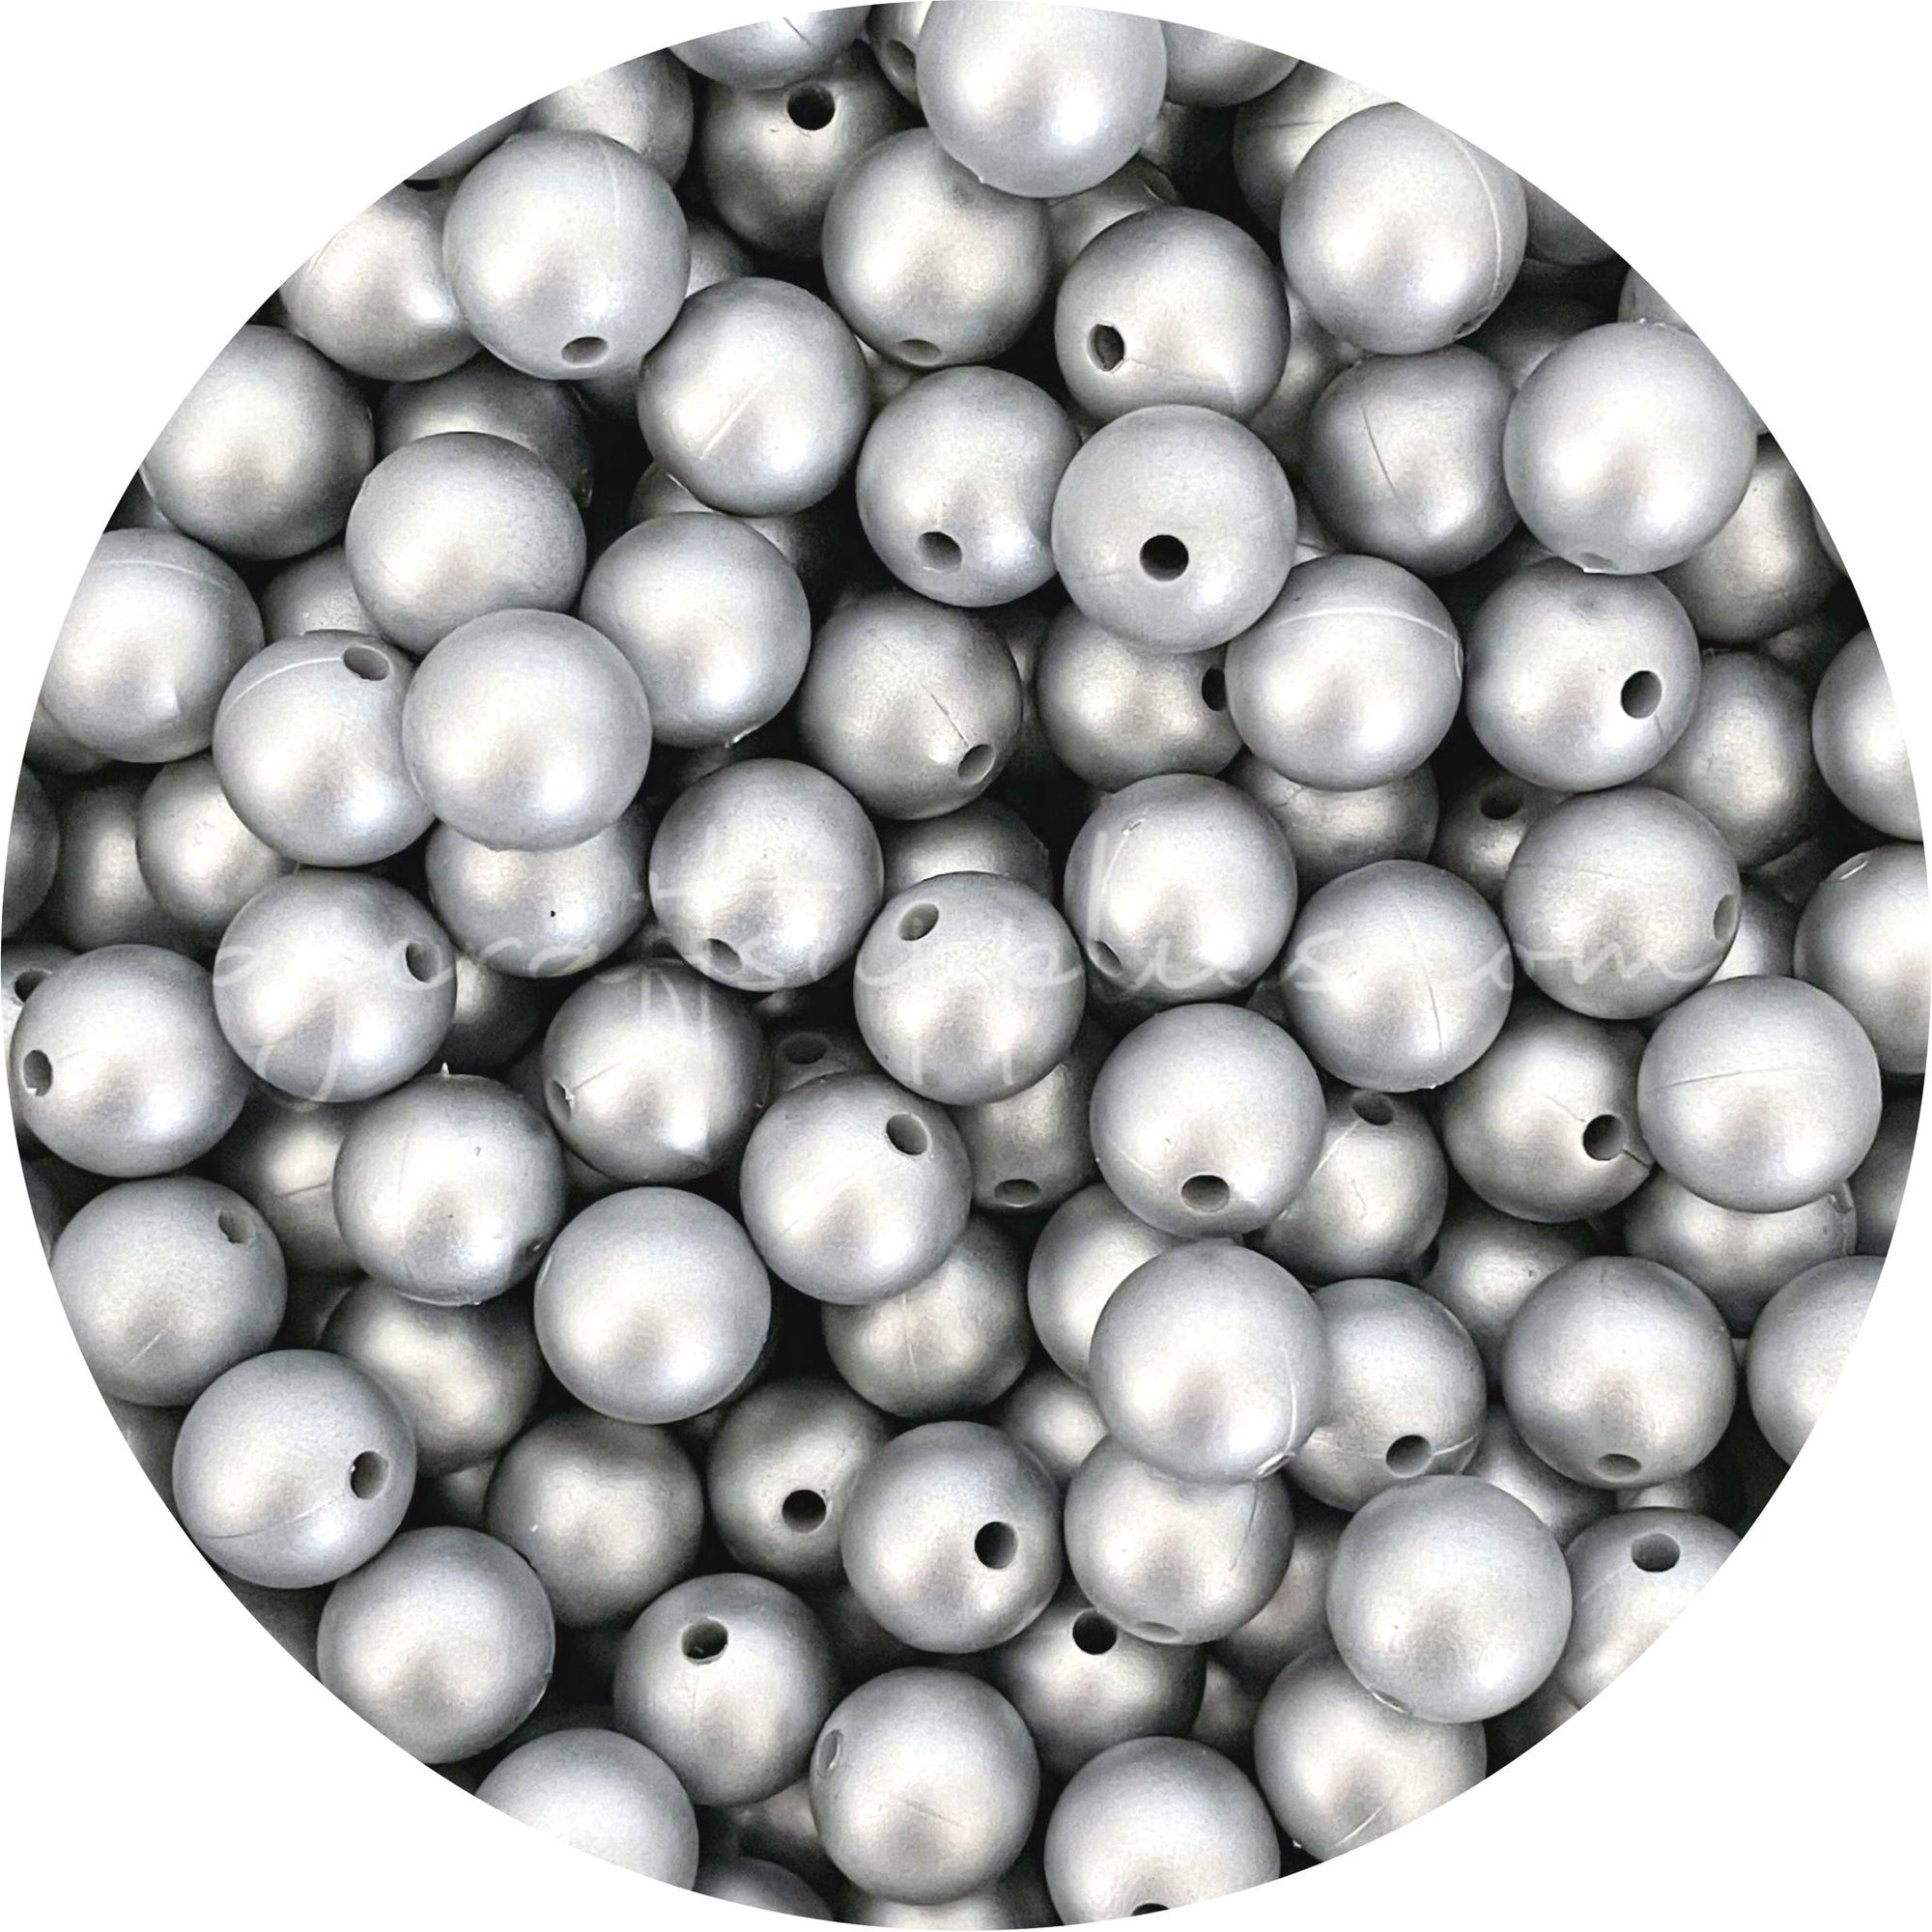 Brushed Silver - 12mm Round Silicone Beads - 10 beads